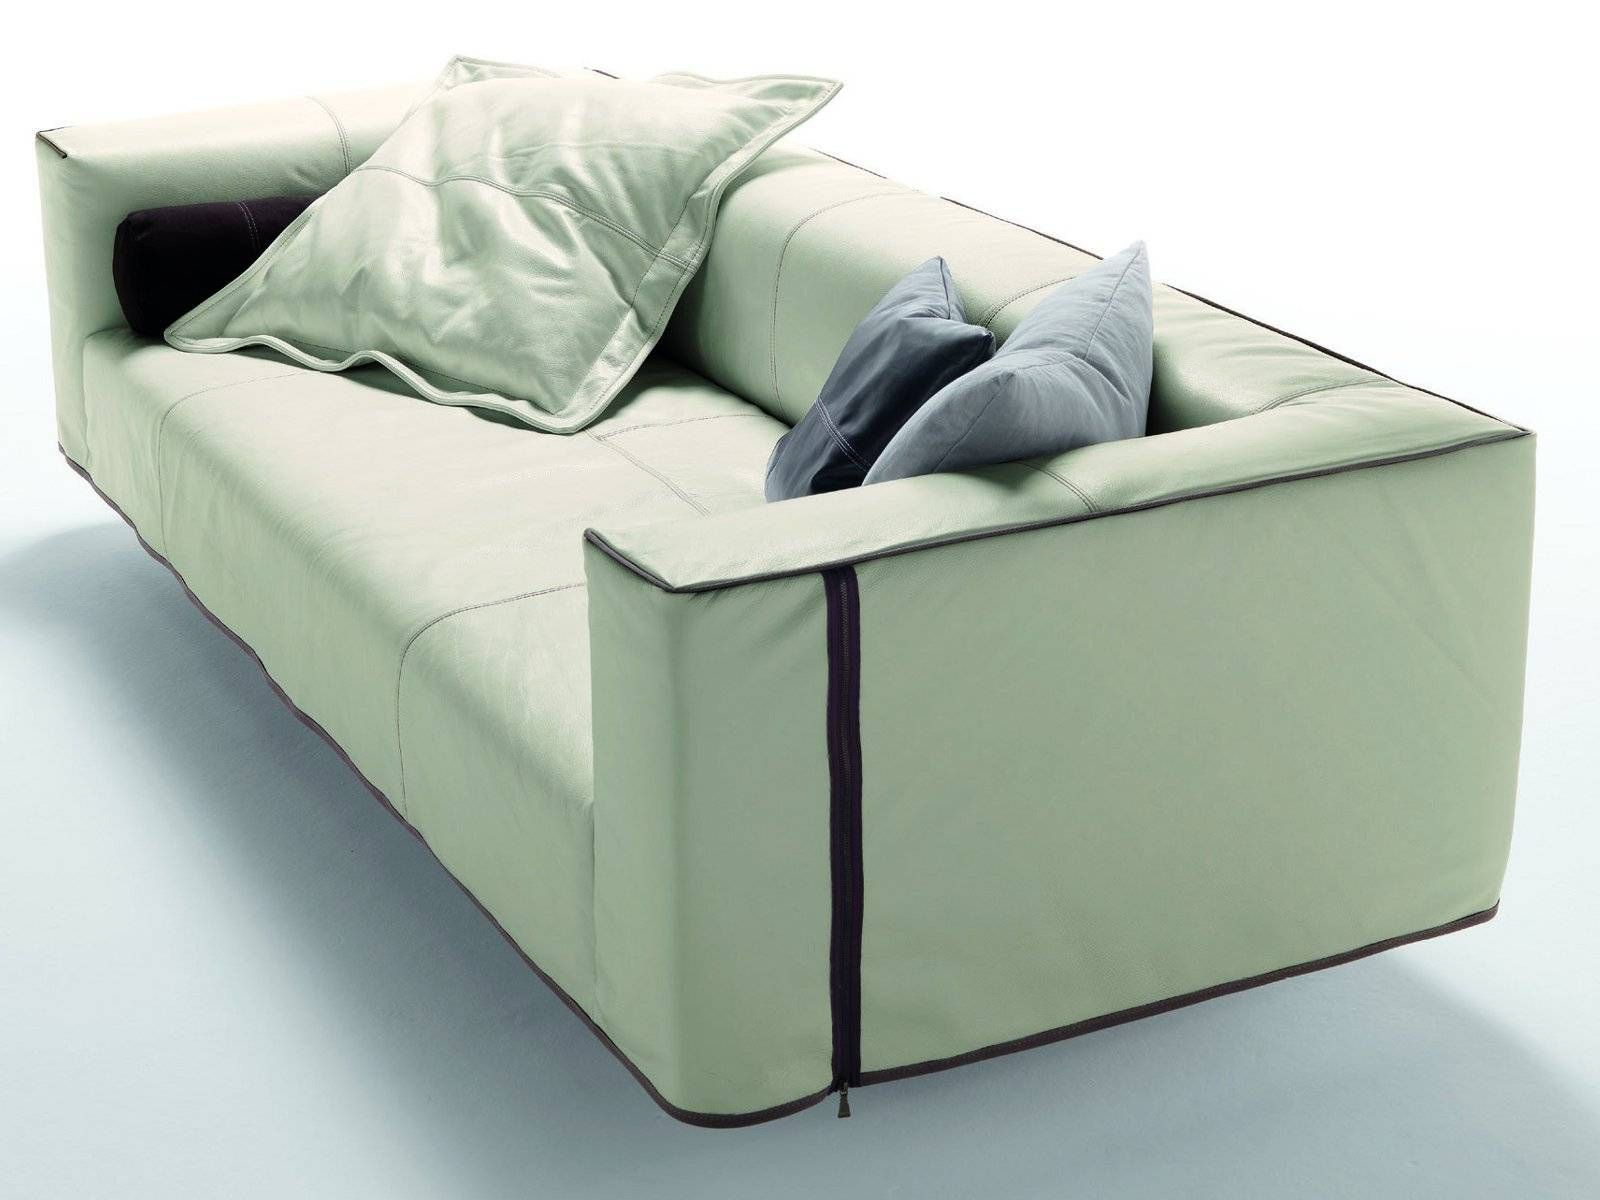 Sofa With Removable Cover Zerocento Zipdésirée Divani Design Pertaining To Sofas With Removable Covers (View 26 of 30)